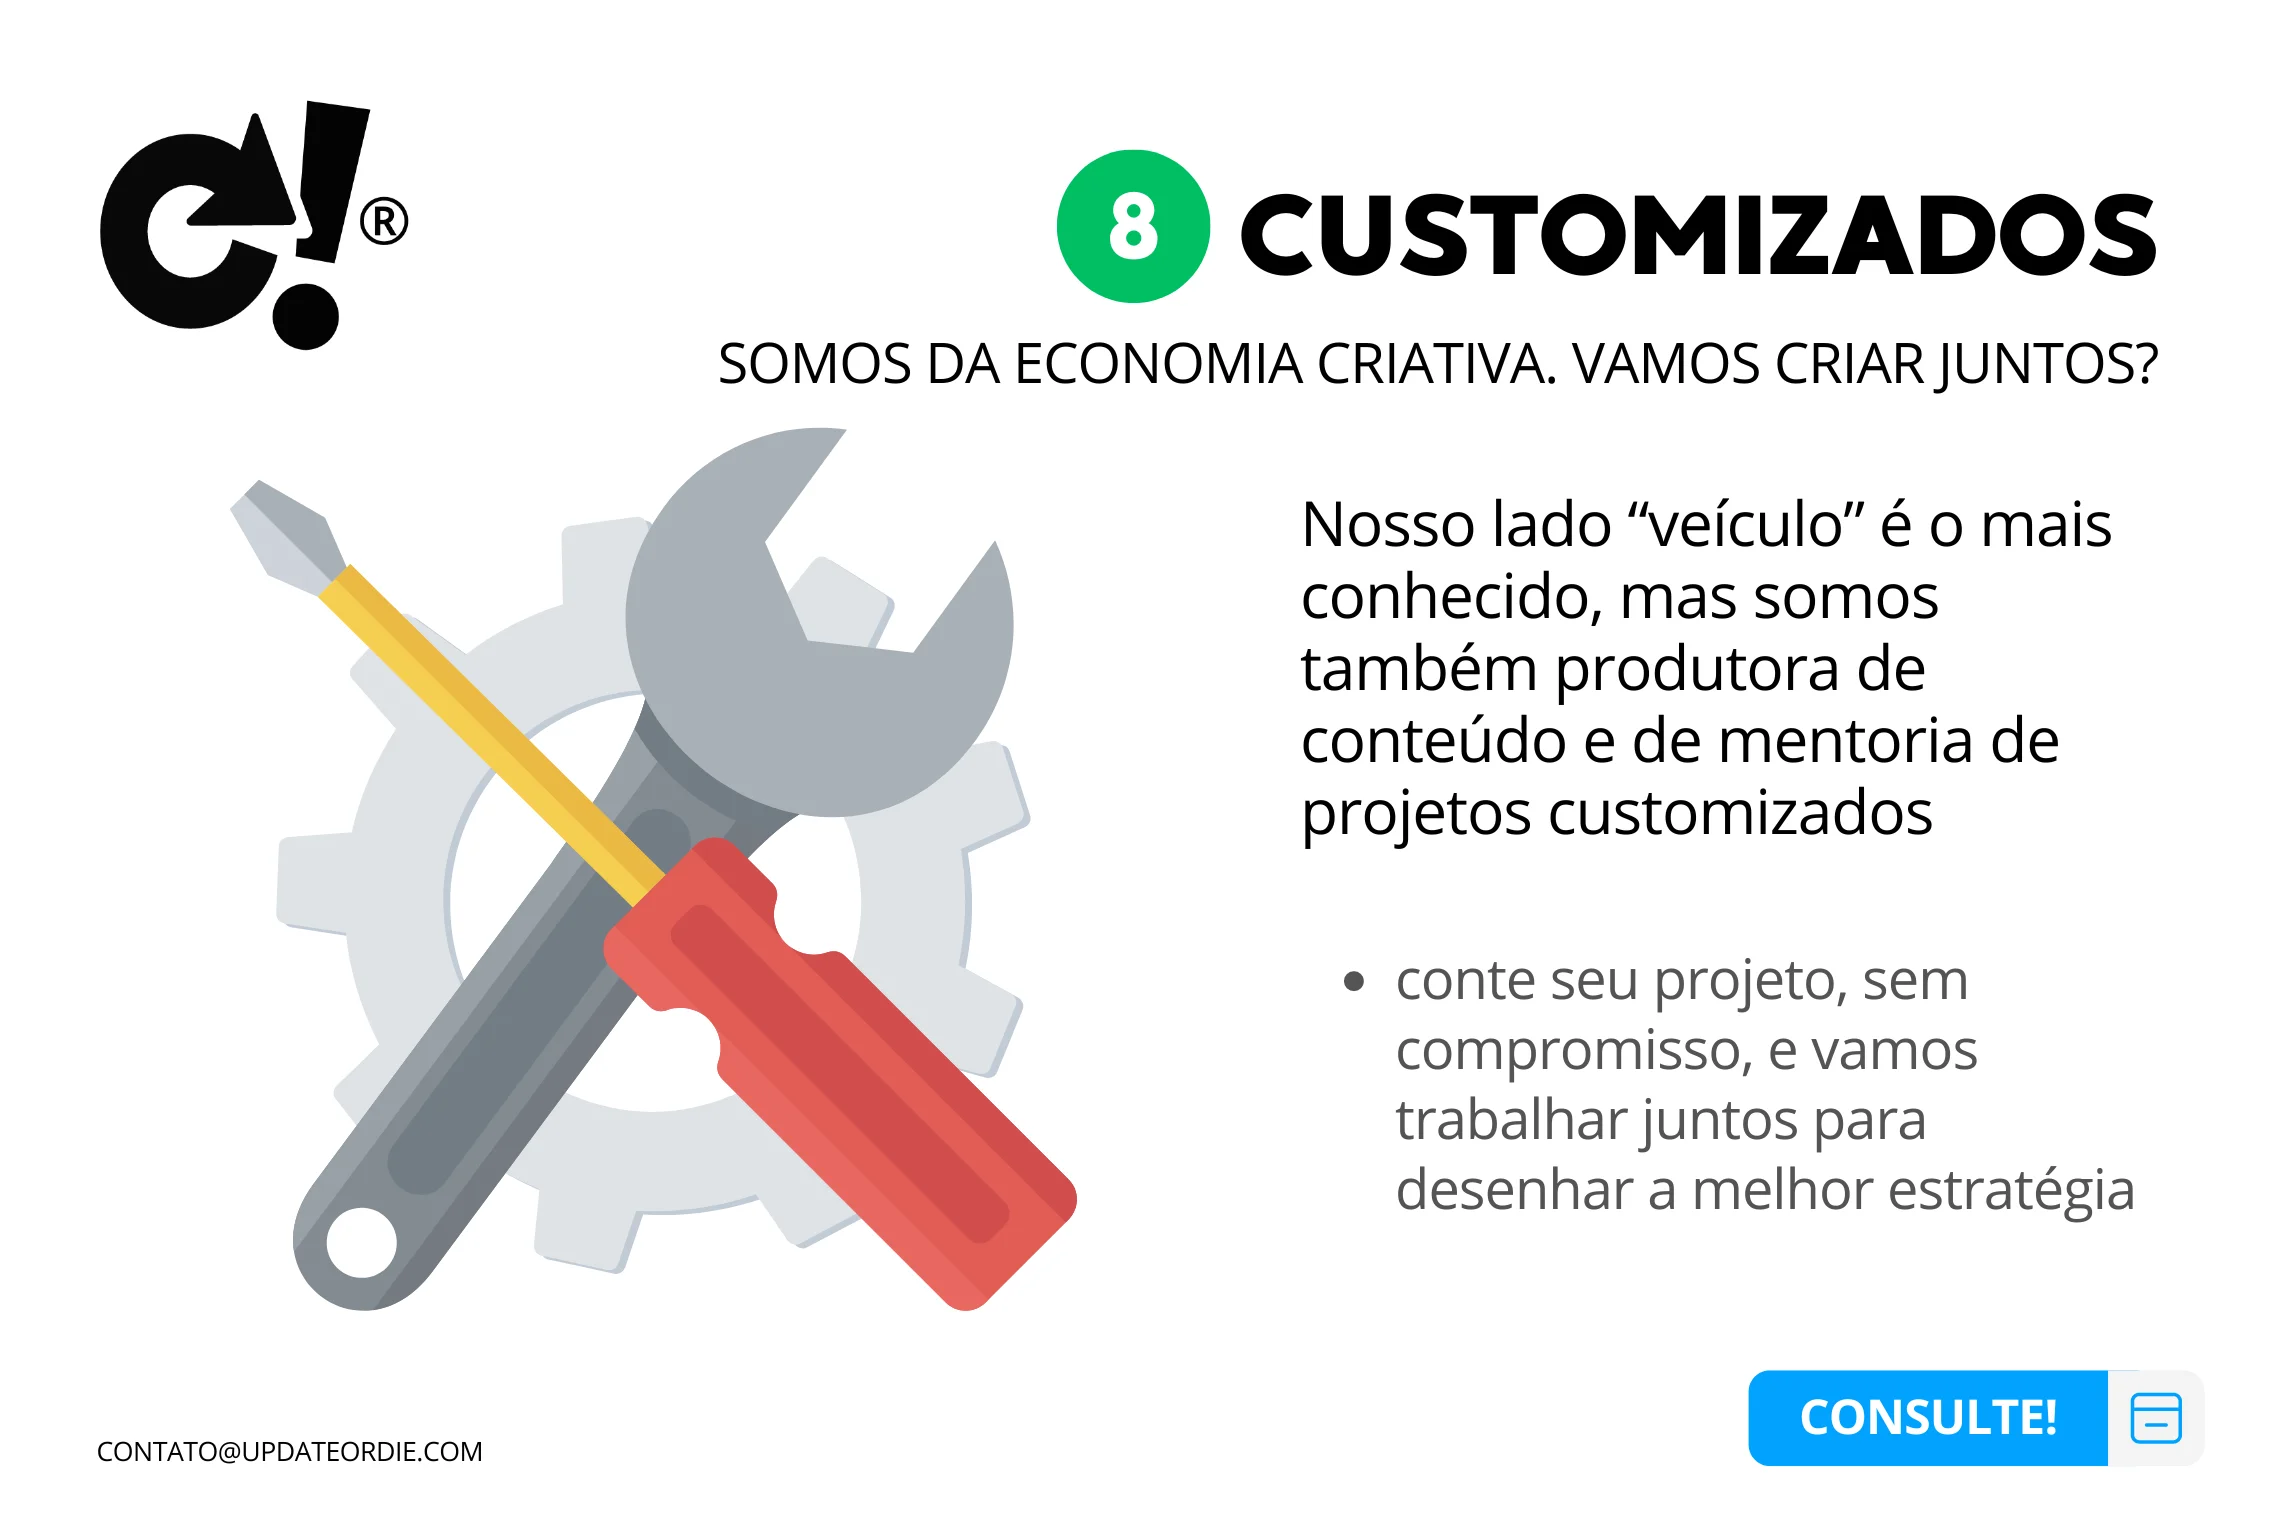 Graphic illustration promoting customized creative economy projects featuring a screwdriver and wrench over gears with text about collaboration and strategy in Portuguese.